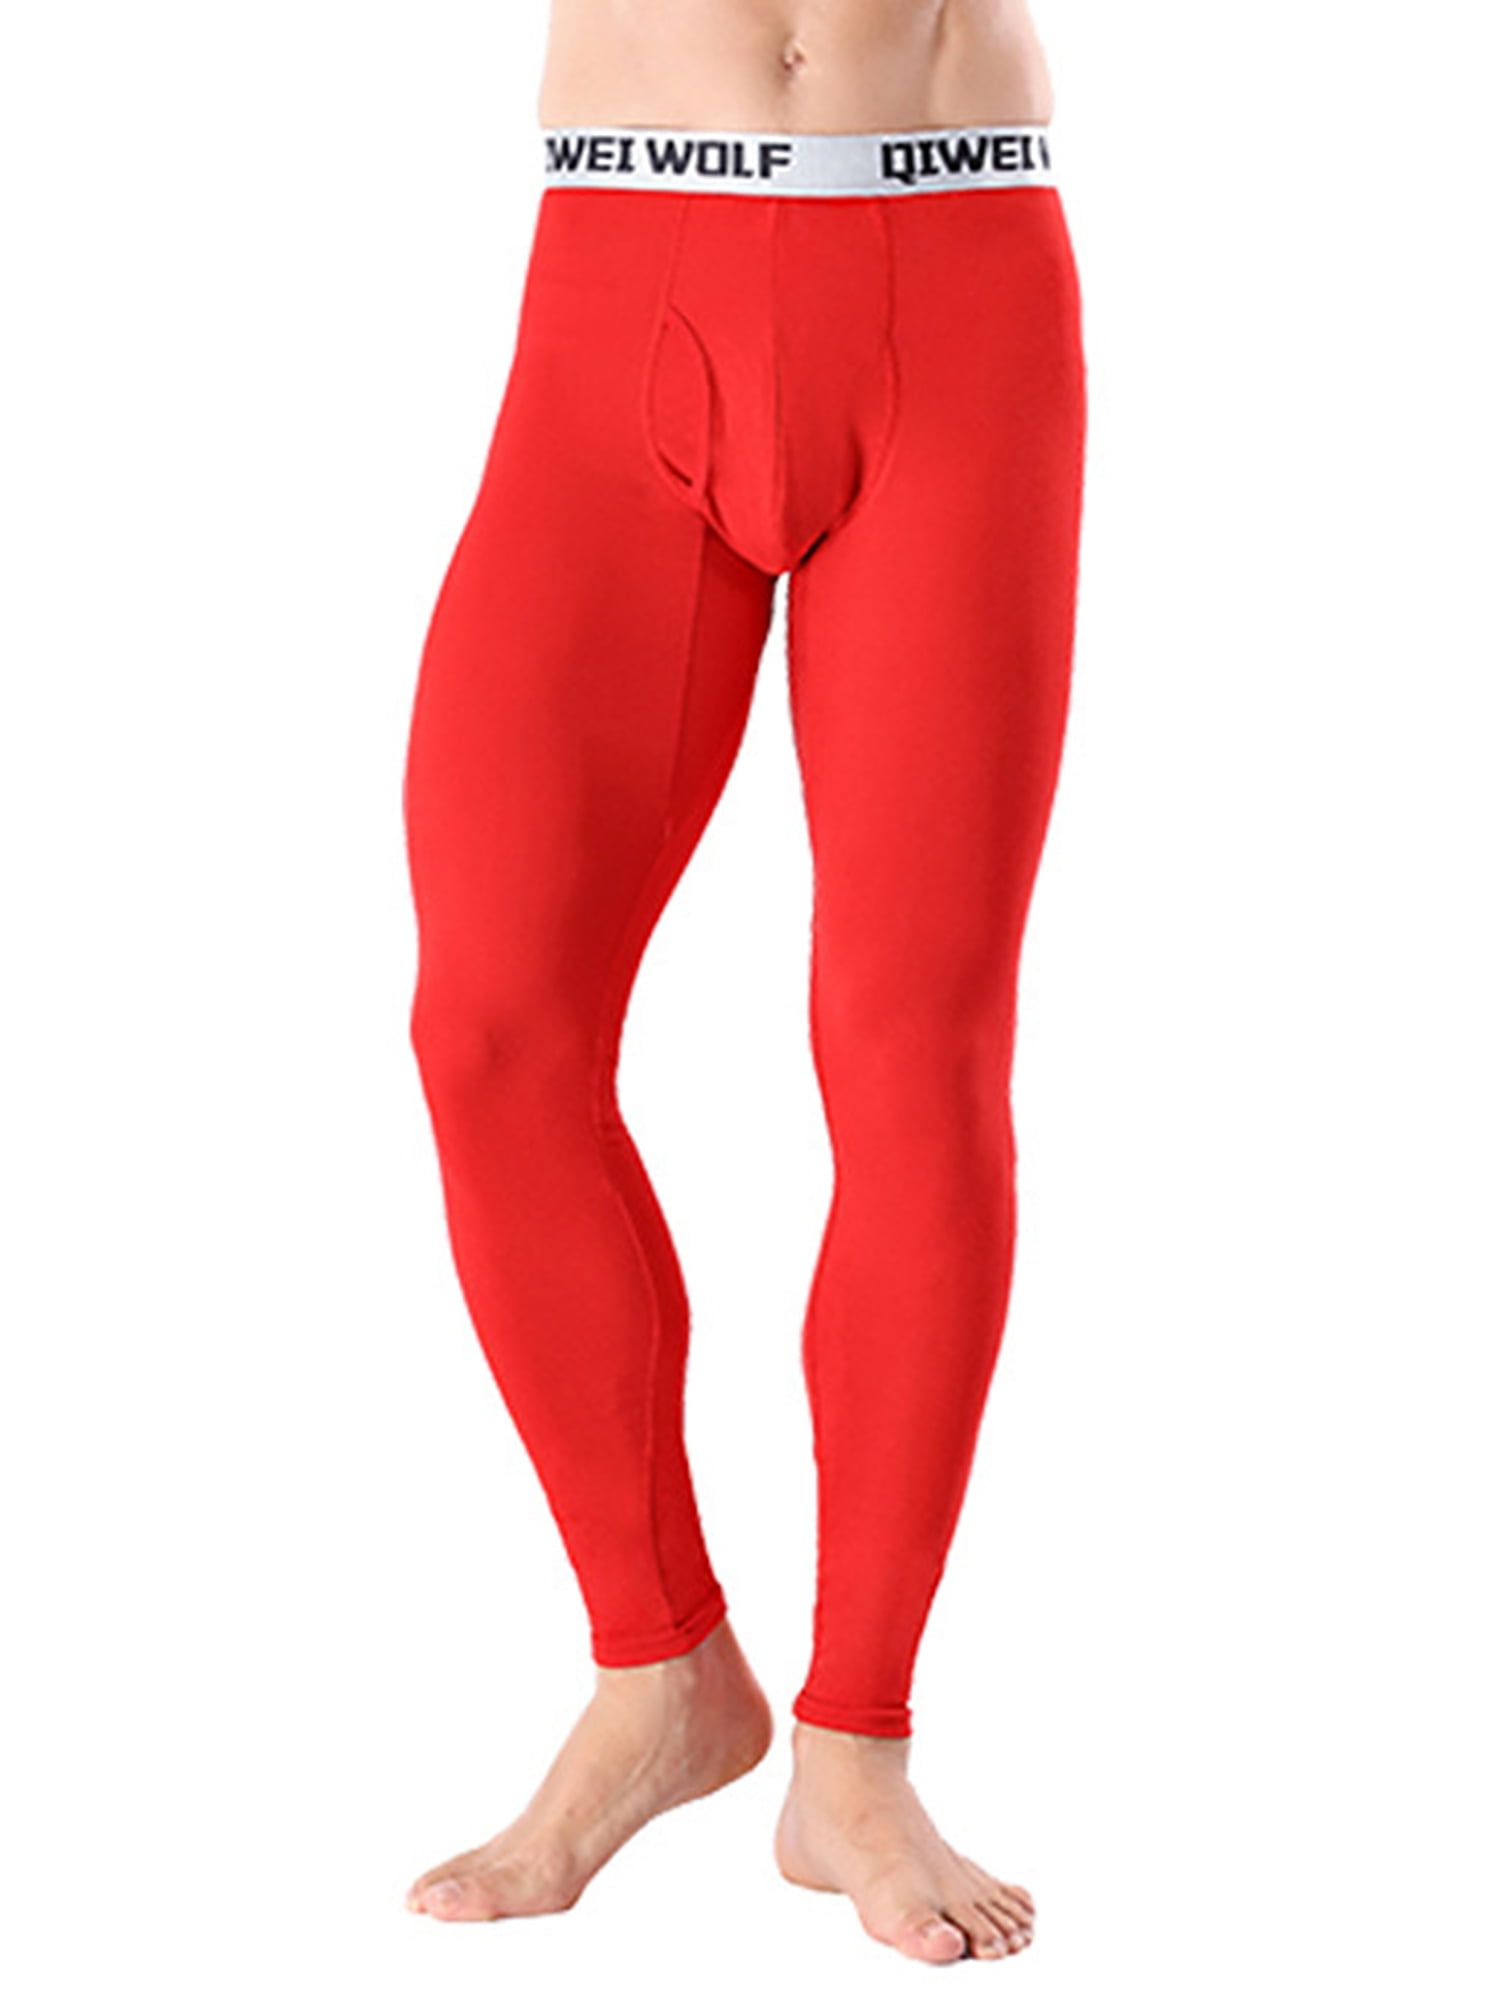 Details about   Mens Thermal Stretch Long Soft Winter Trousers Underwear Leggings Pants E3M5 